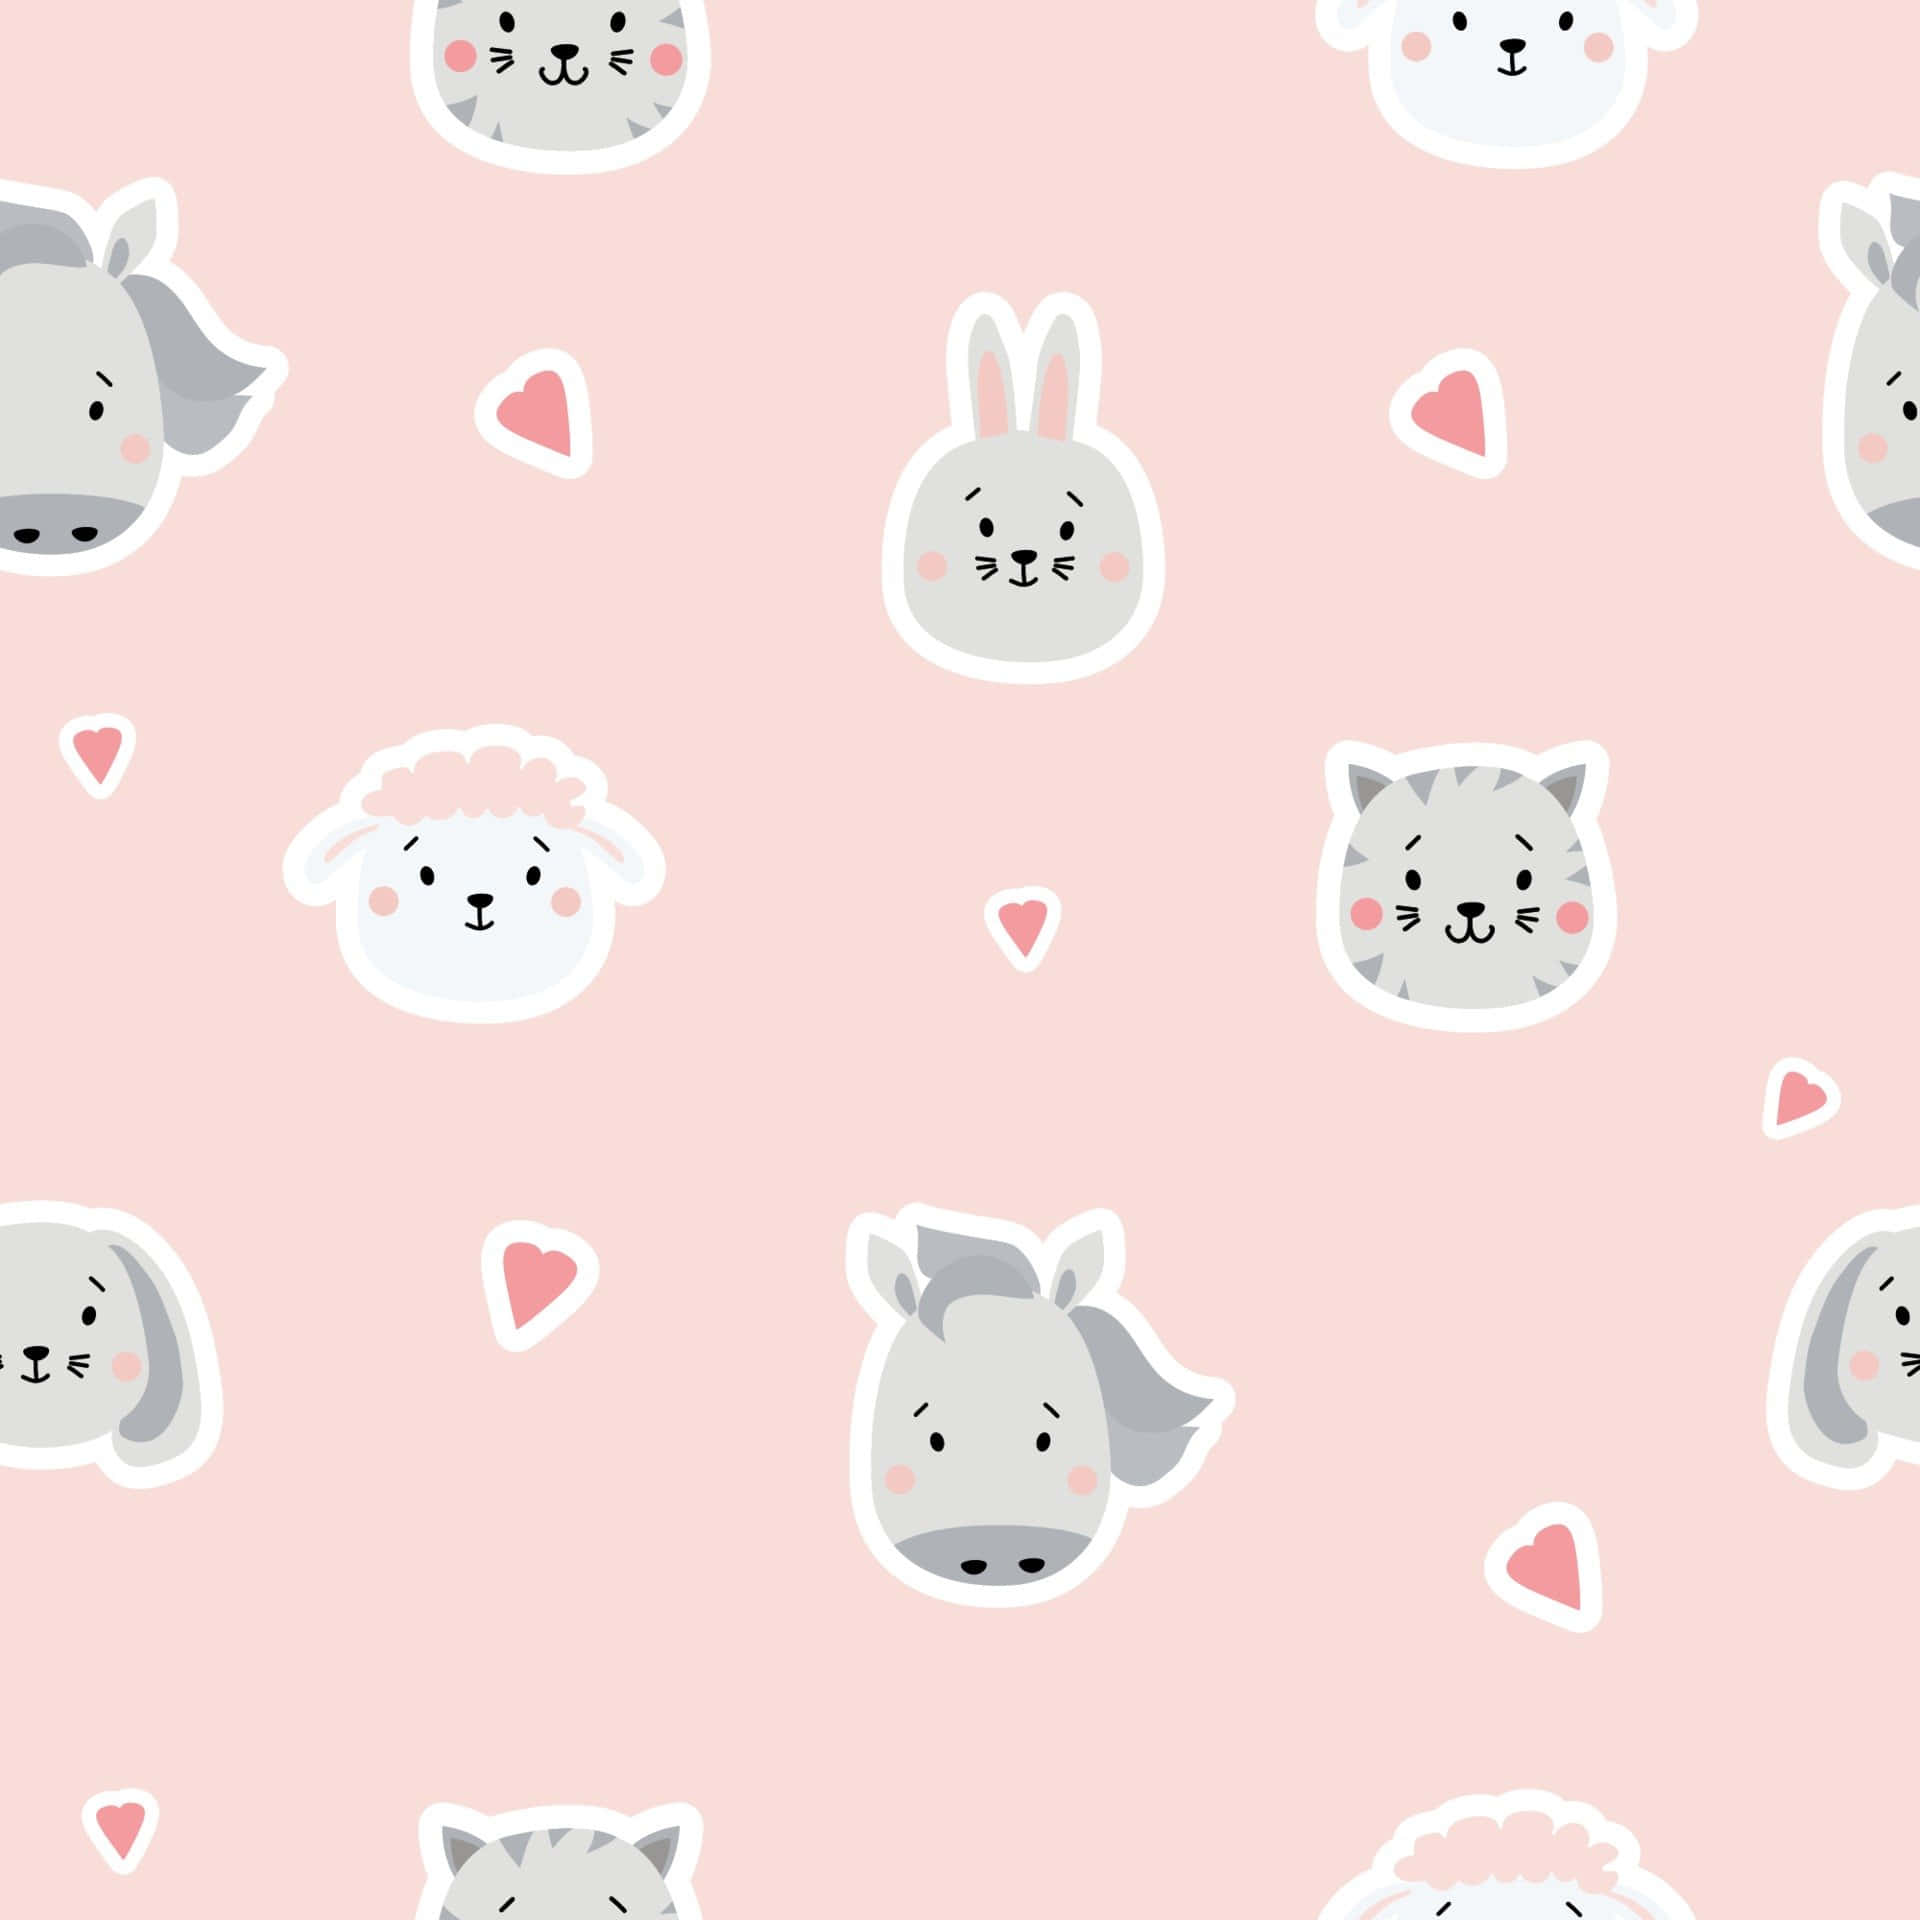 100+] Cute Stickers Wallpapers